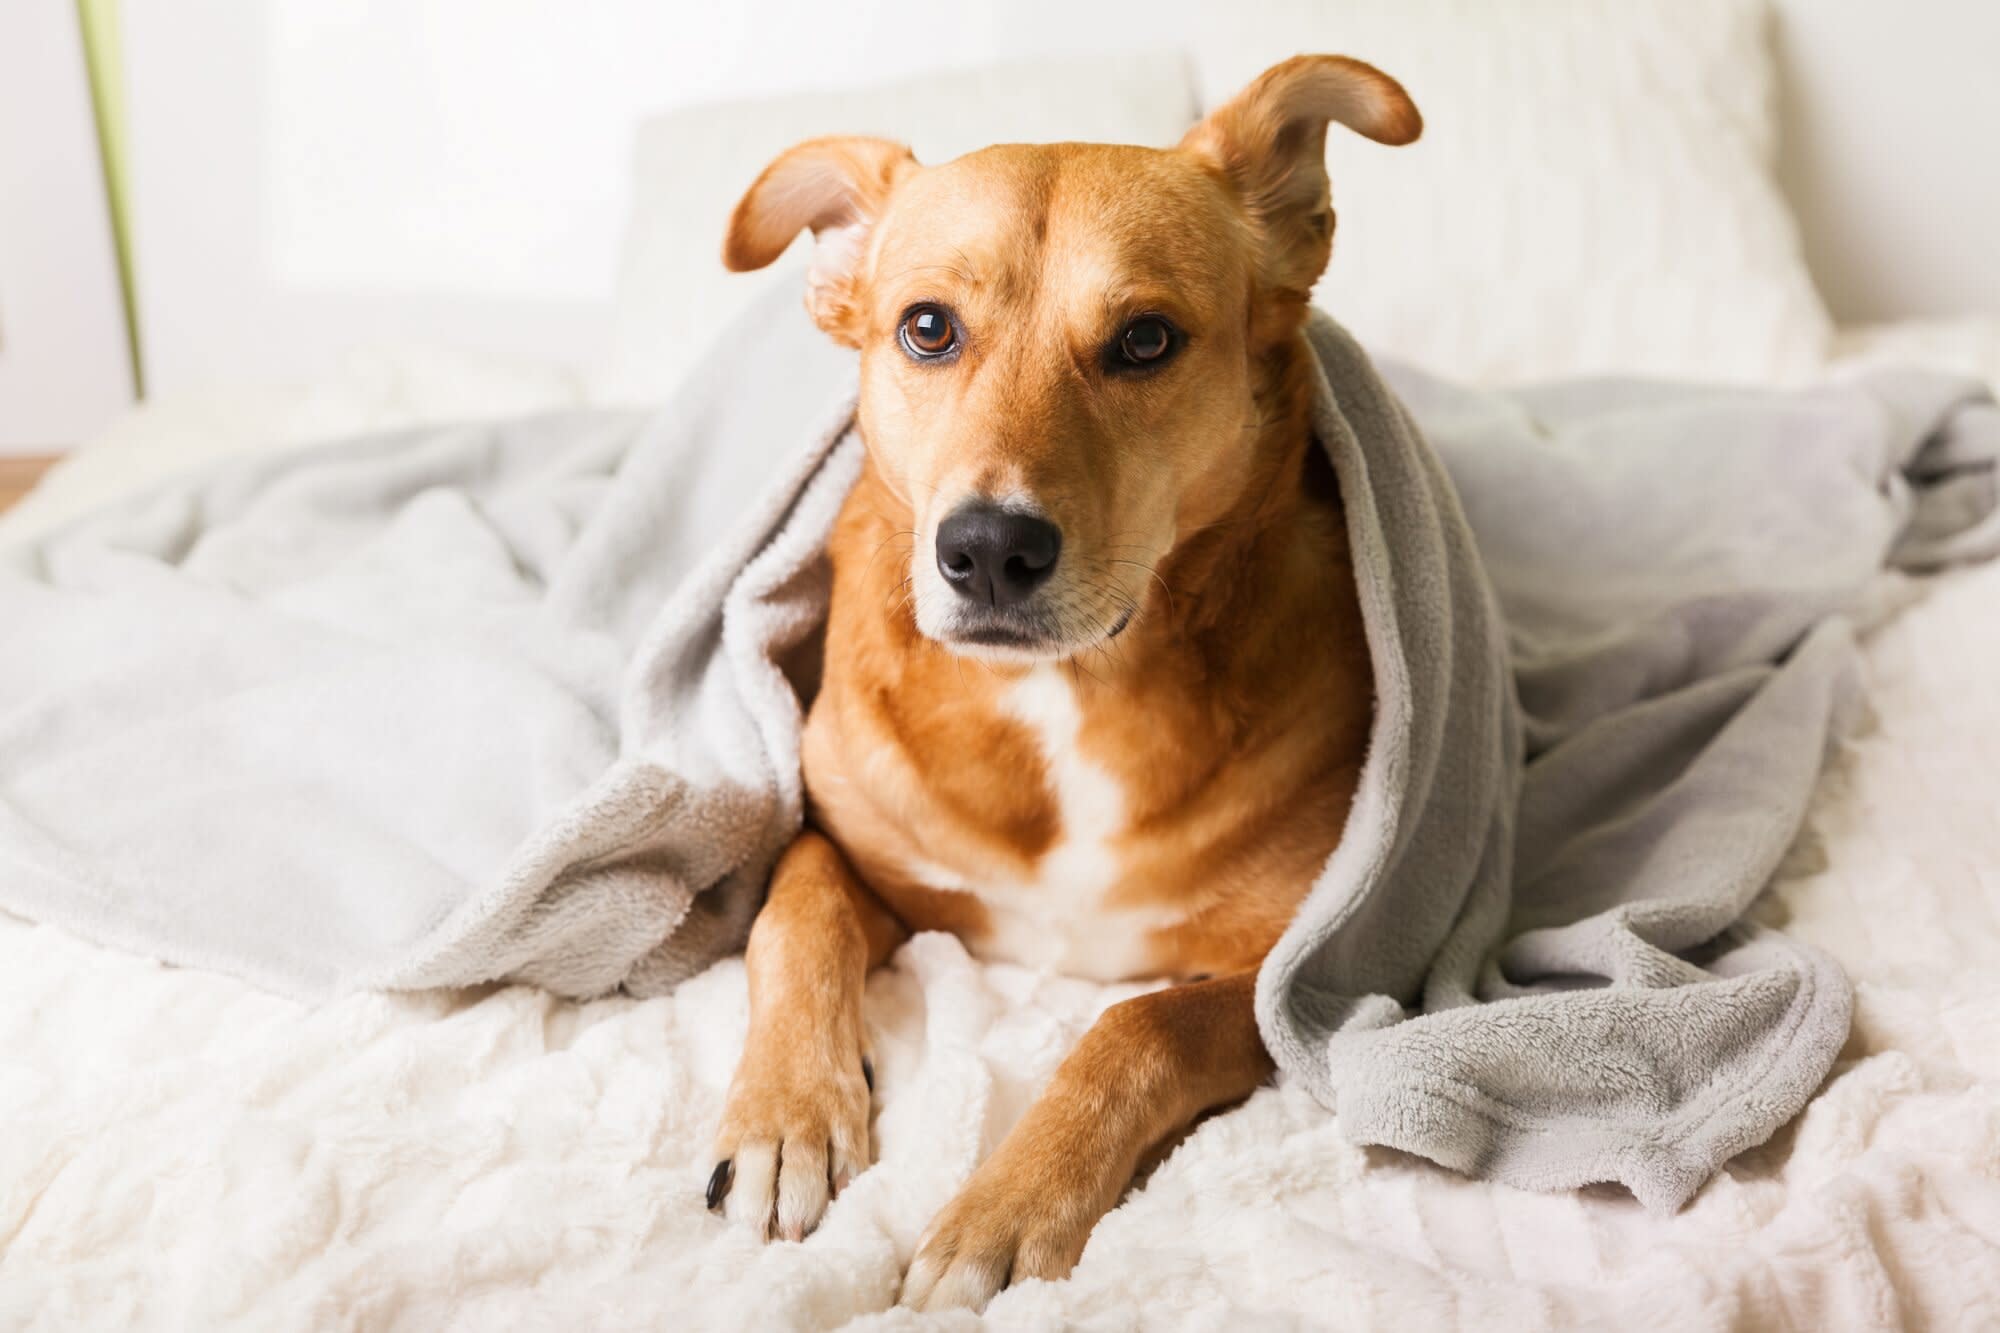 What You Need to Know About Caring for Your Pets During